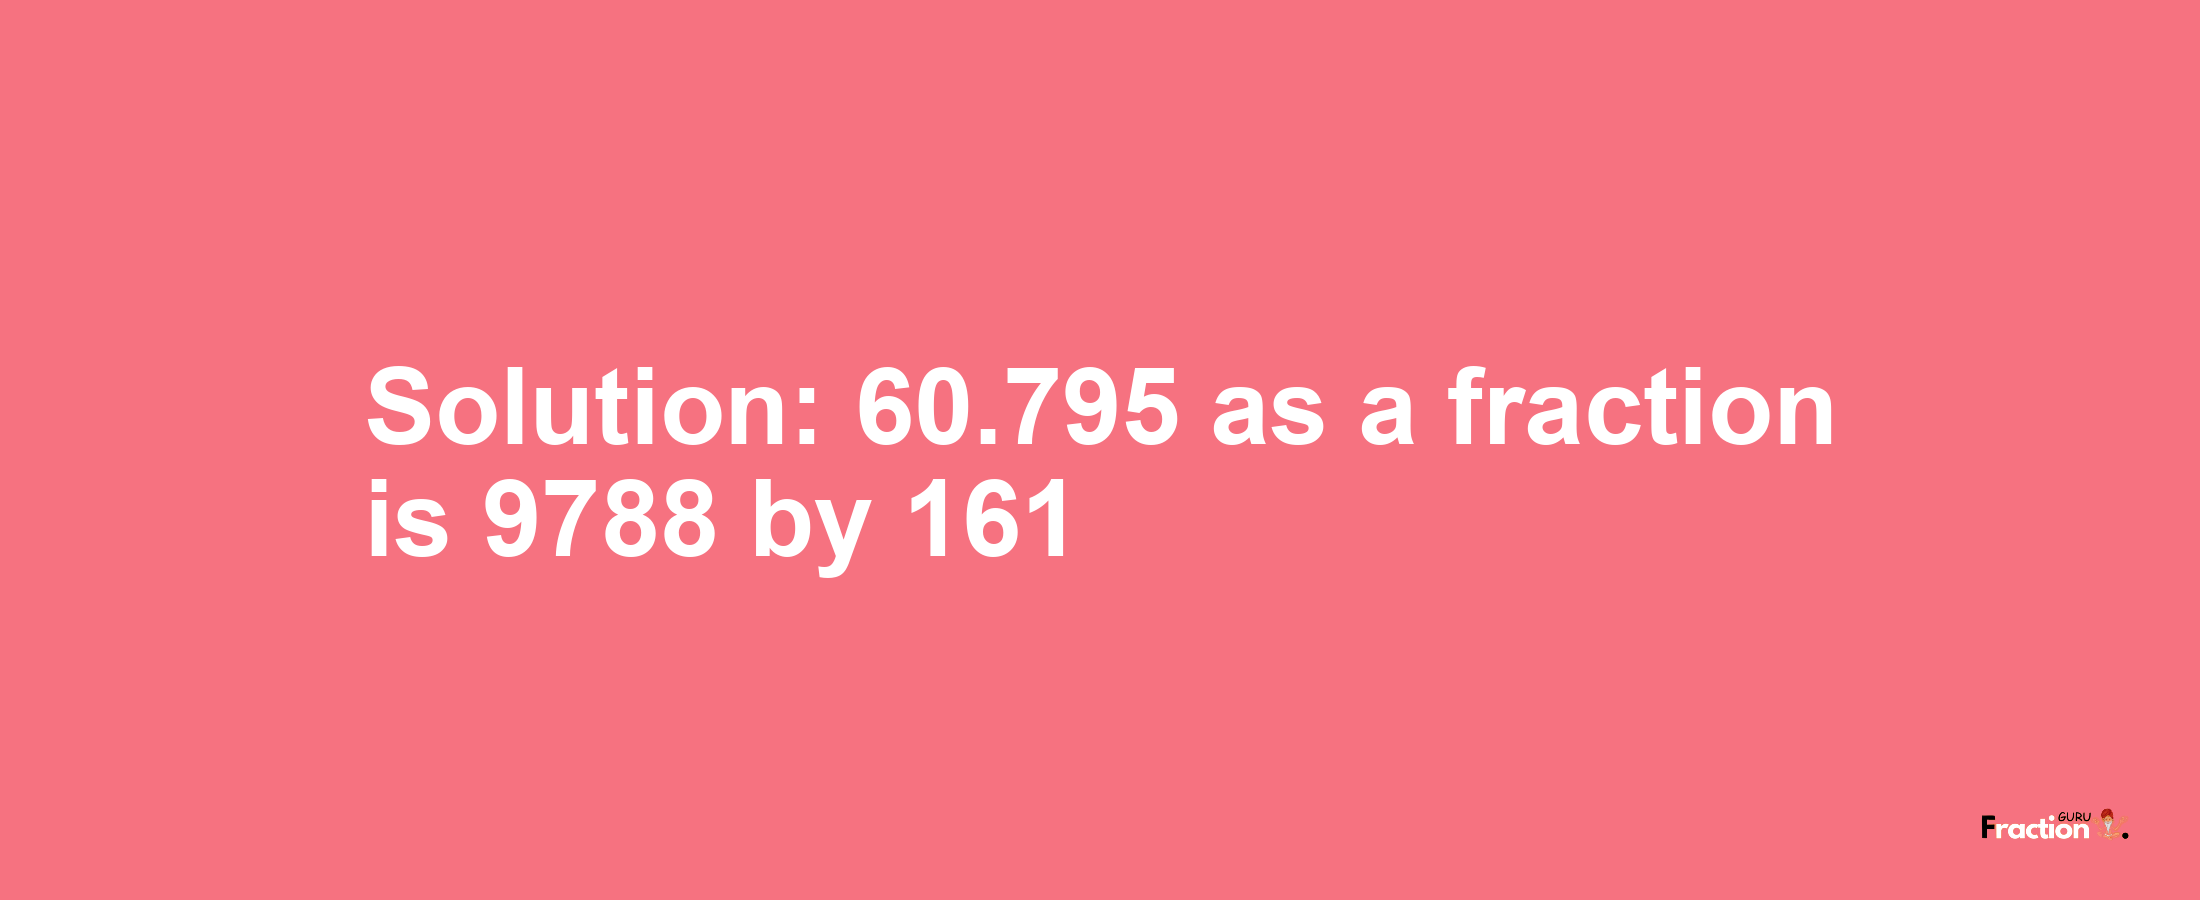 Solution:60.795 as a fraction is 9788/161